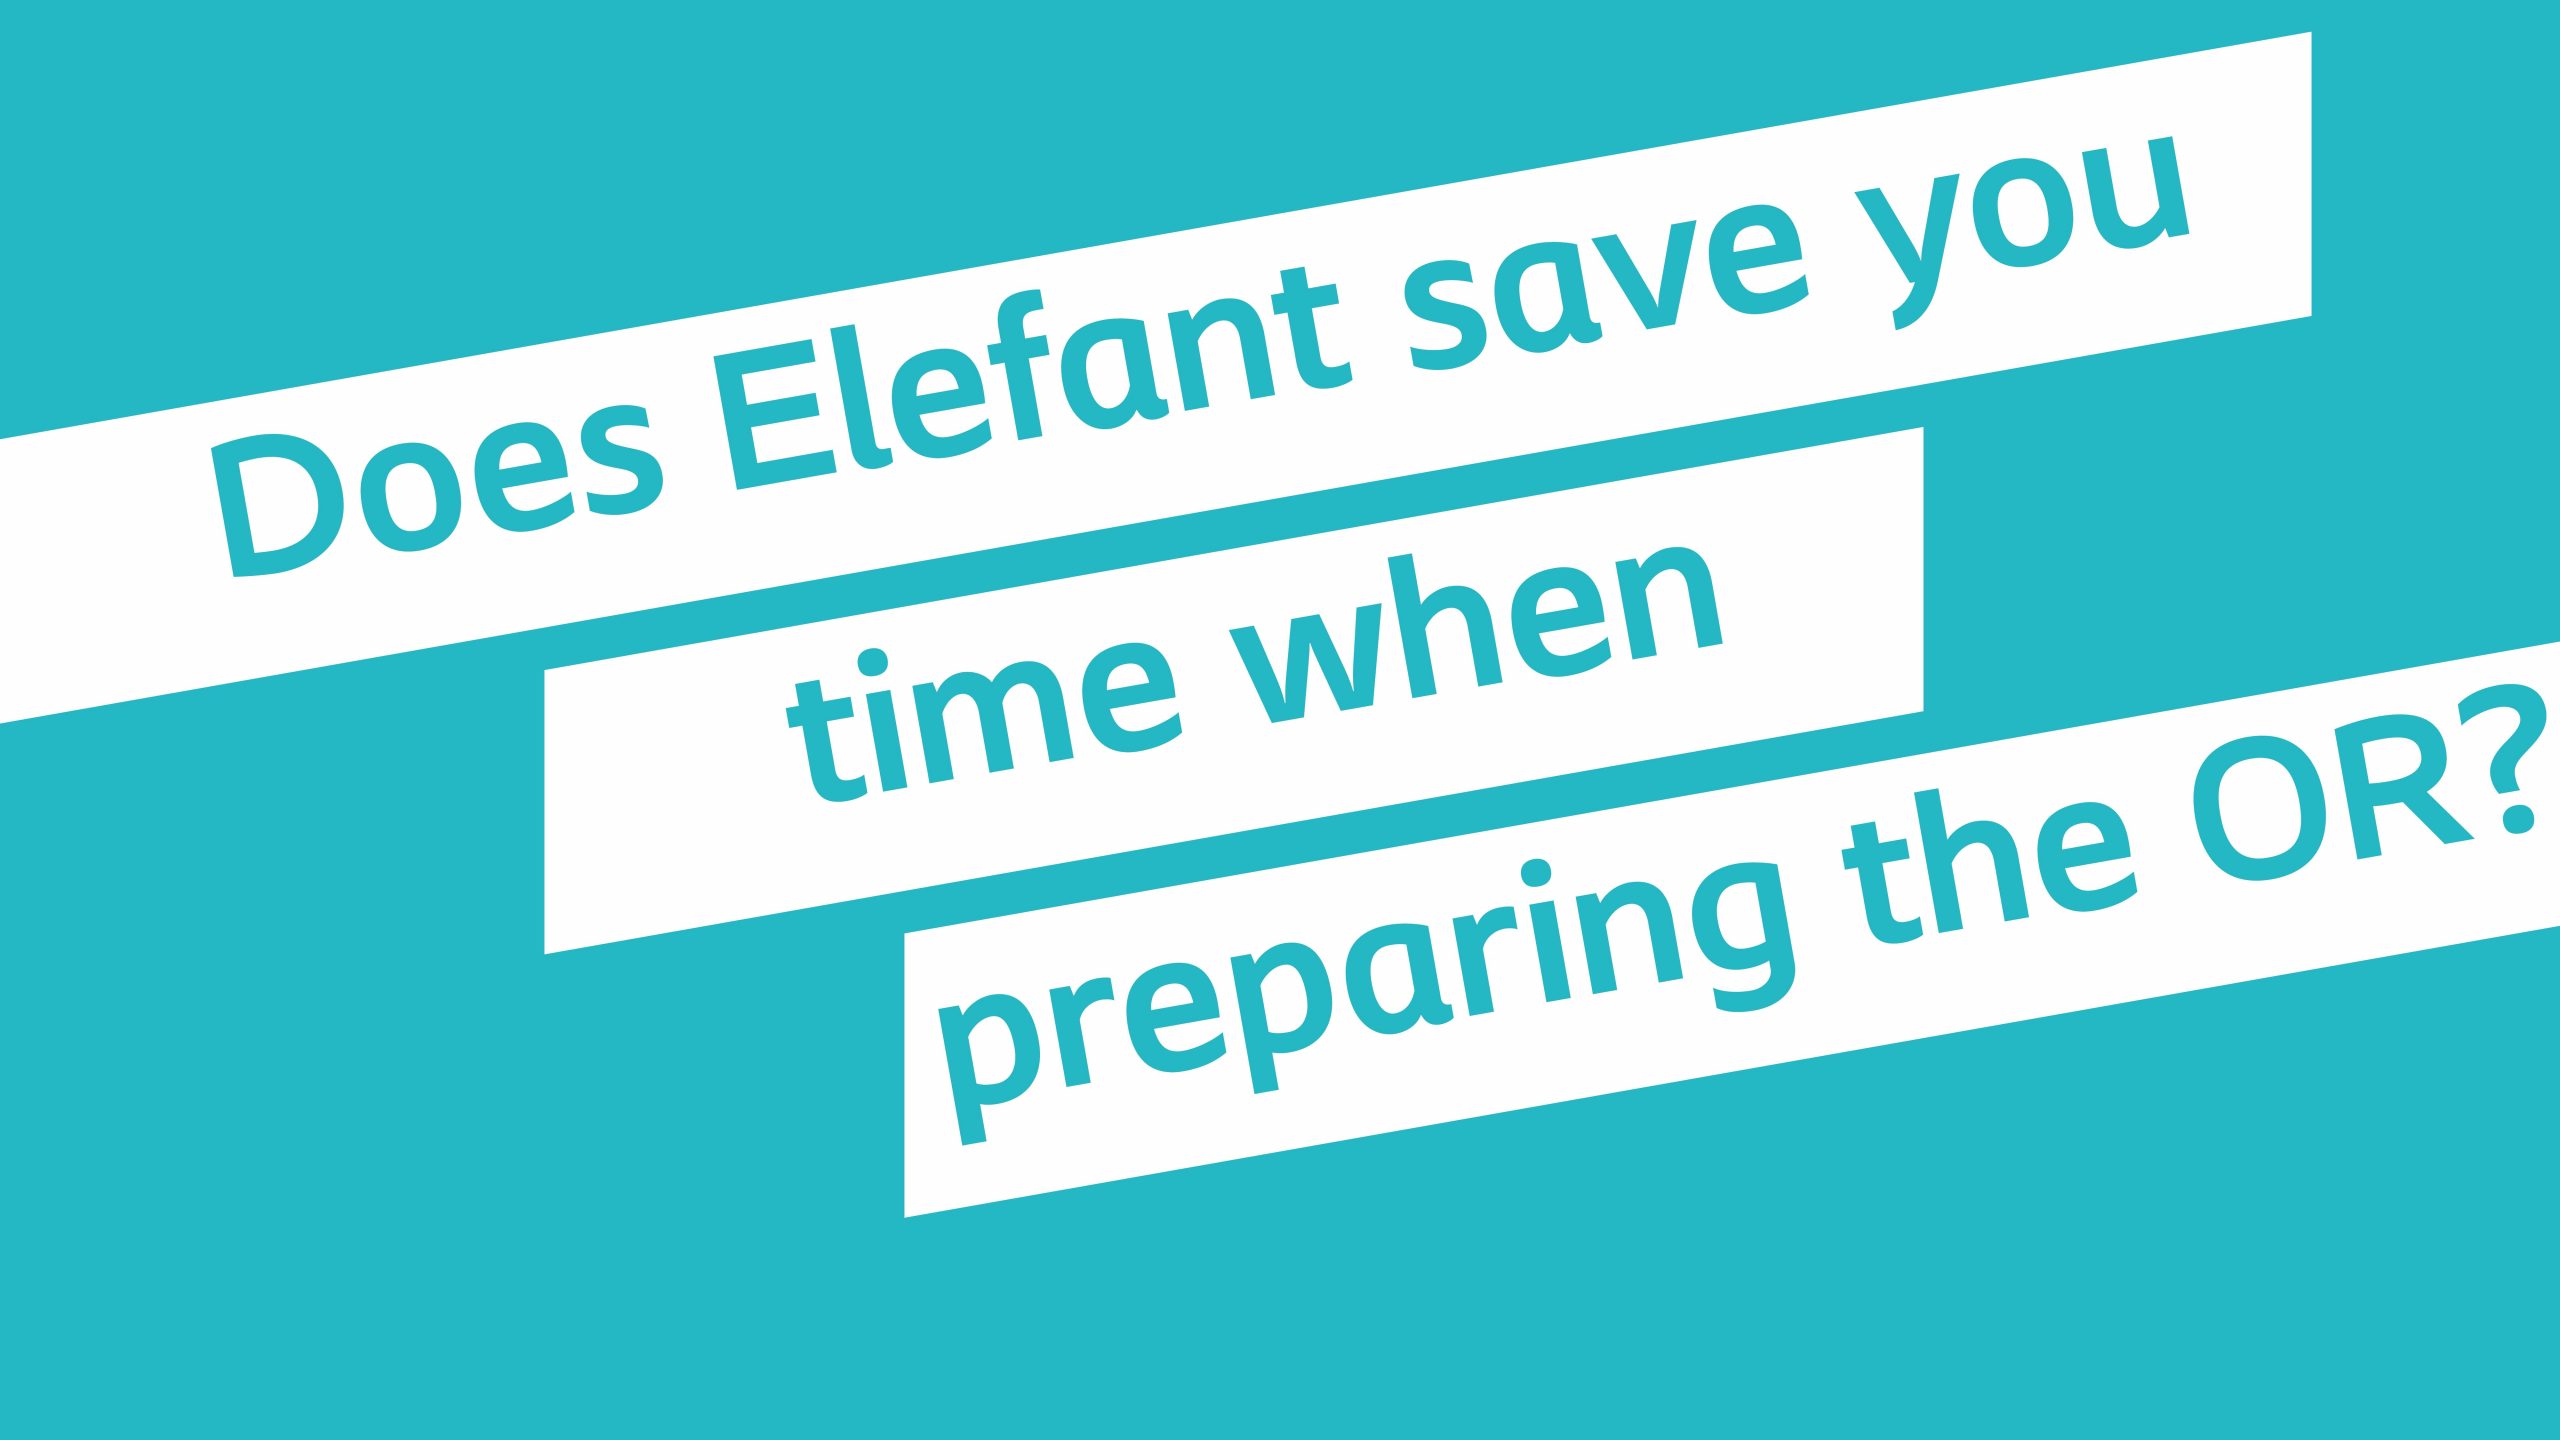 Does Elefant save you time when preparing the OR?